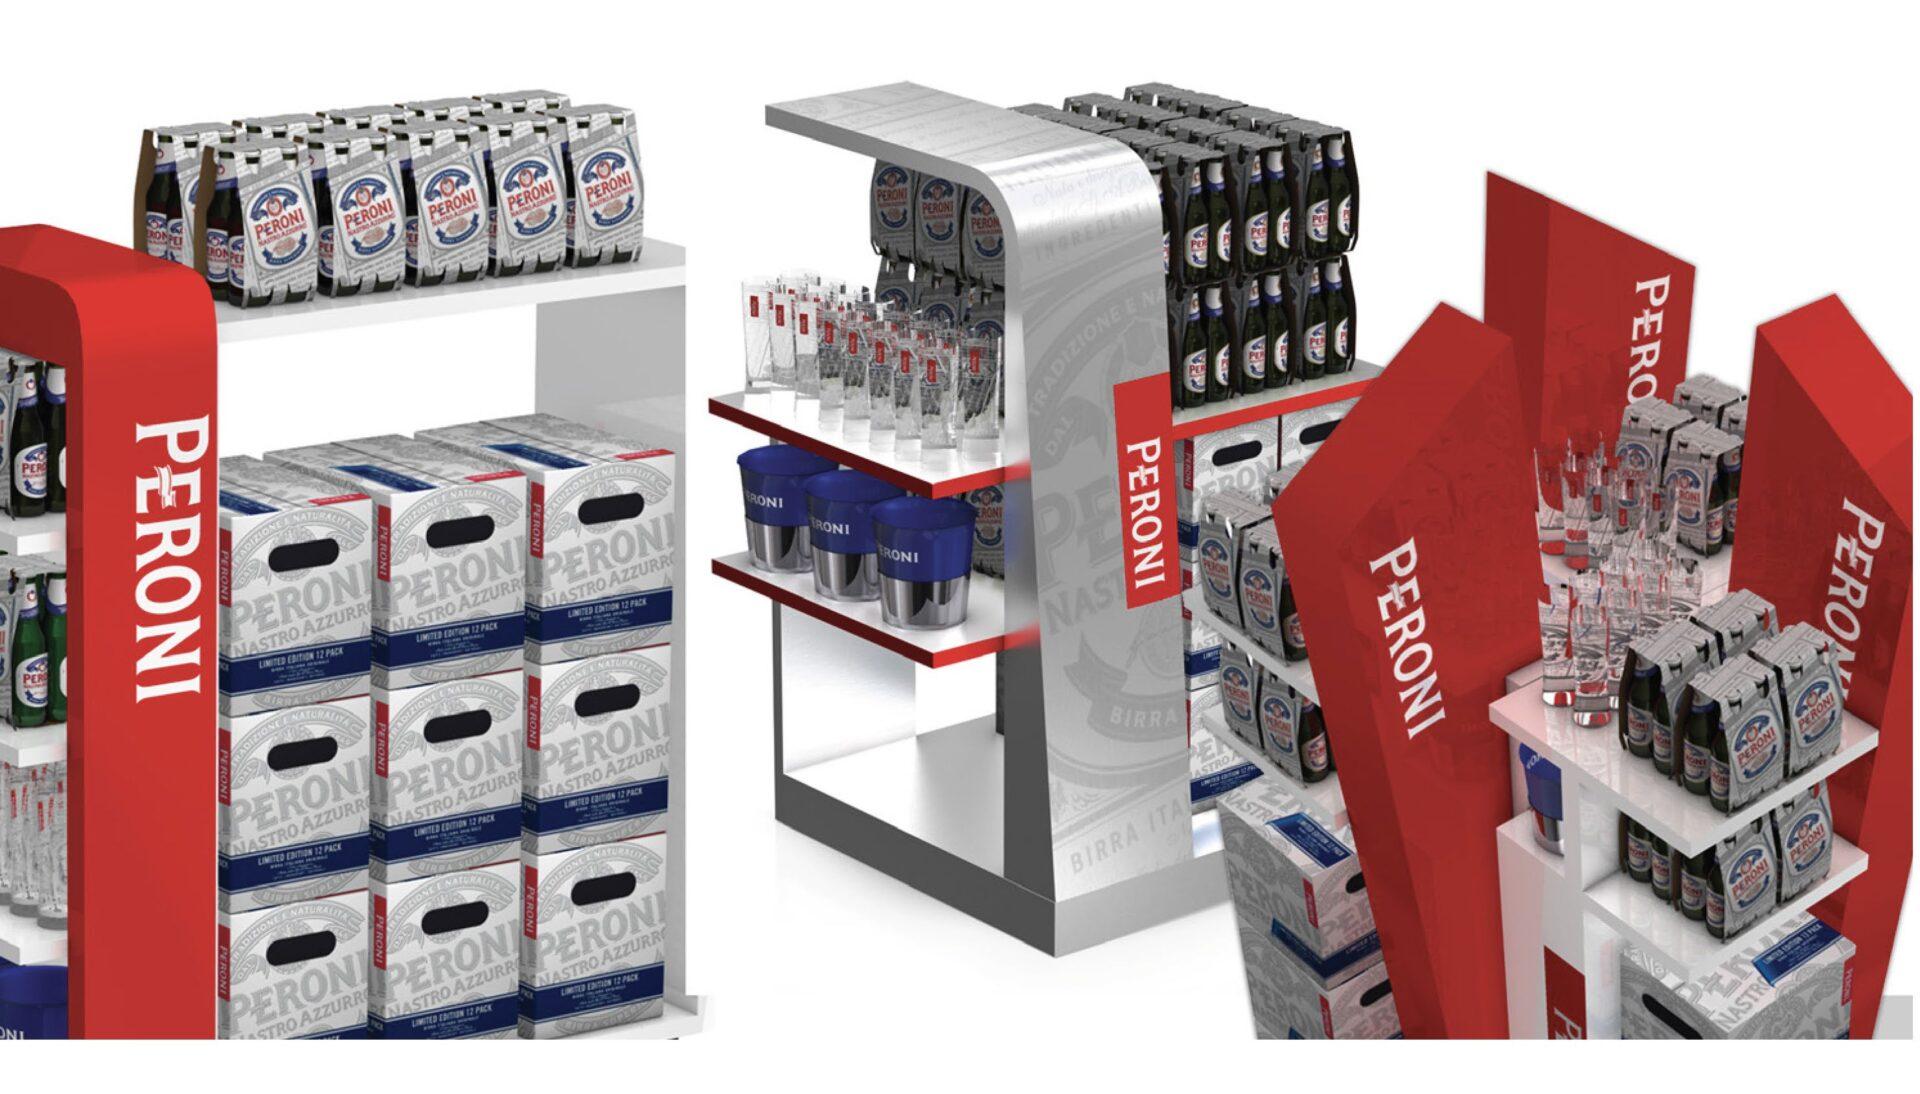 Asahi Breweries Peroni Point of Sale Design Agency and Packaging Design